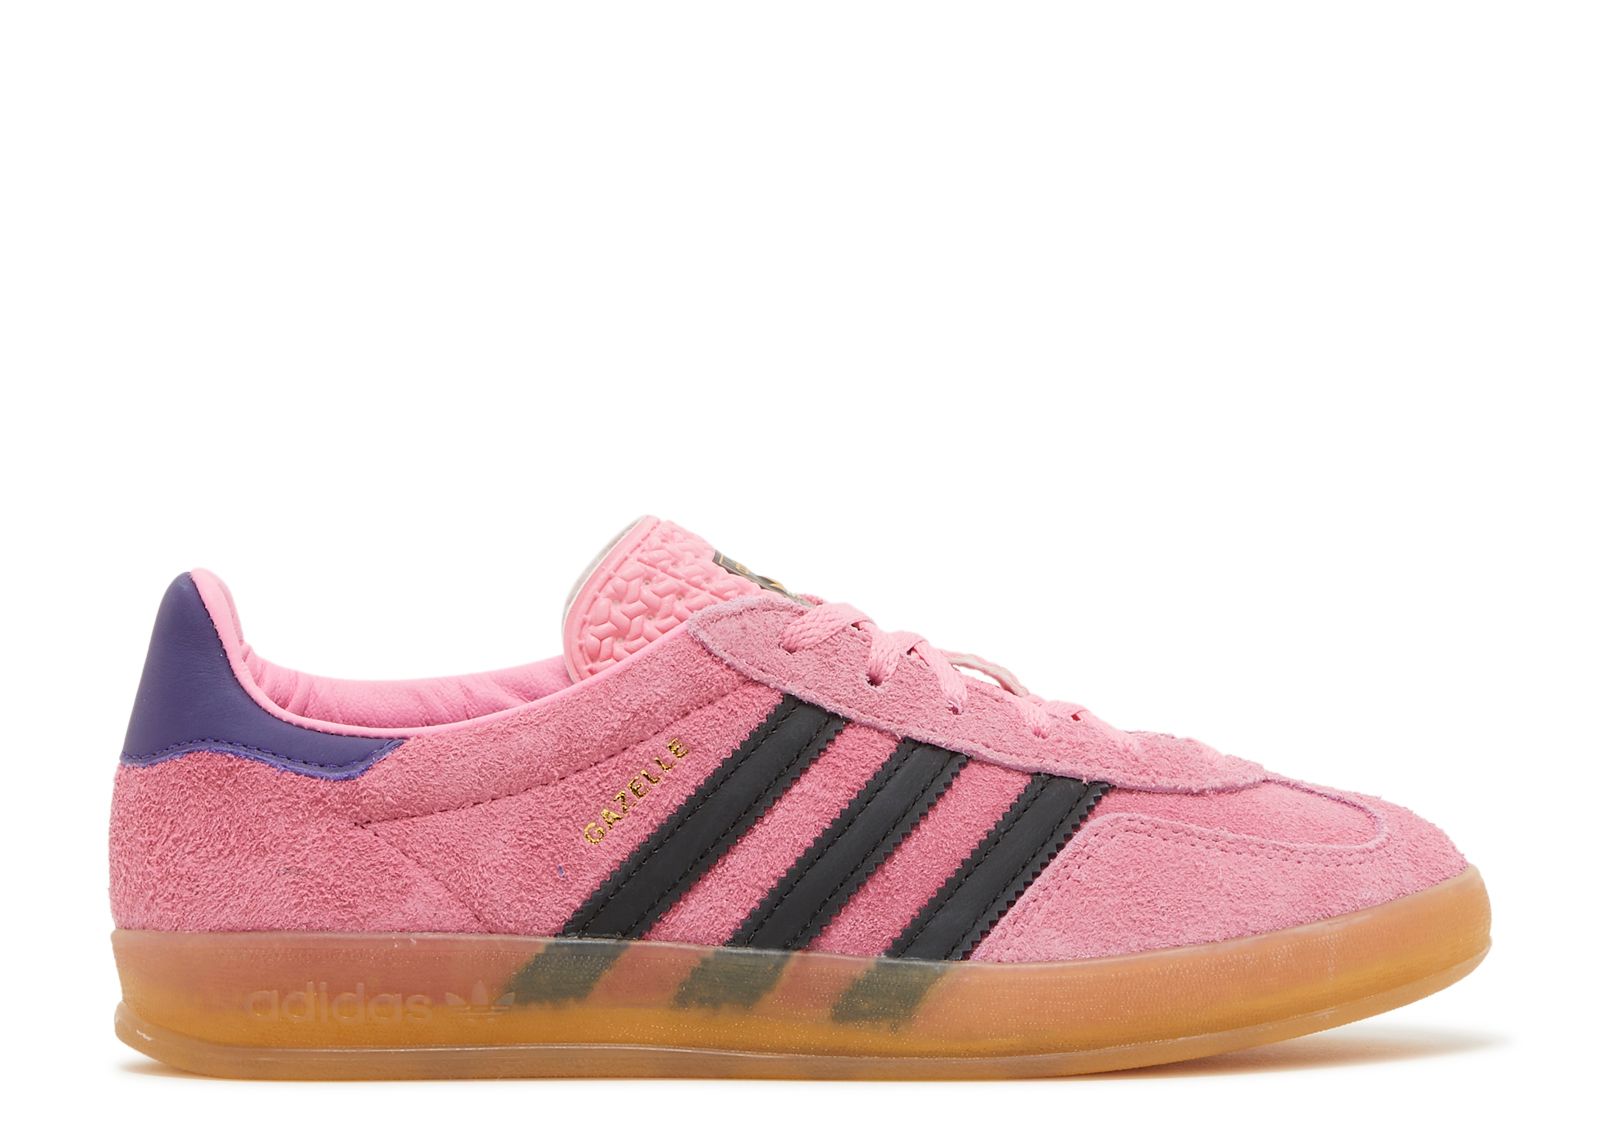 adidas Gazelle 85 (Pink Fusion & Clear Sky), now available at our DC & VA  locations. Online soon #adidasoriginals #adidasgazelle